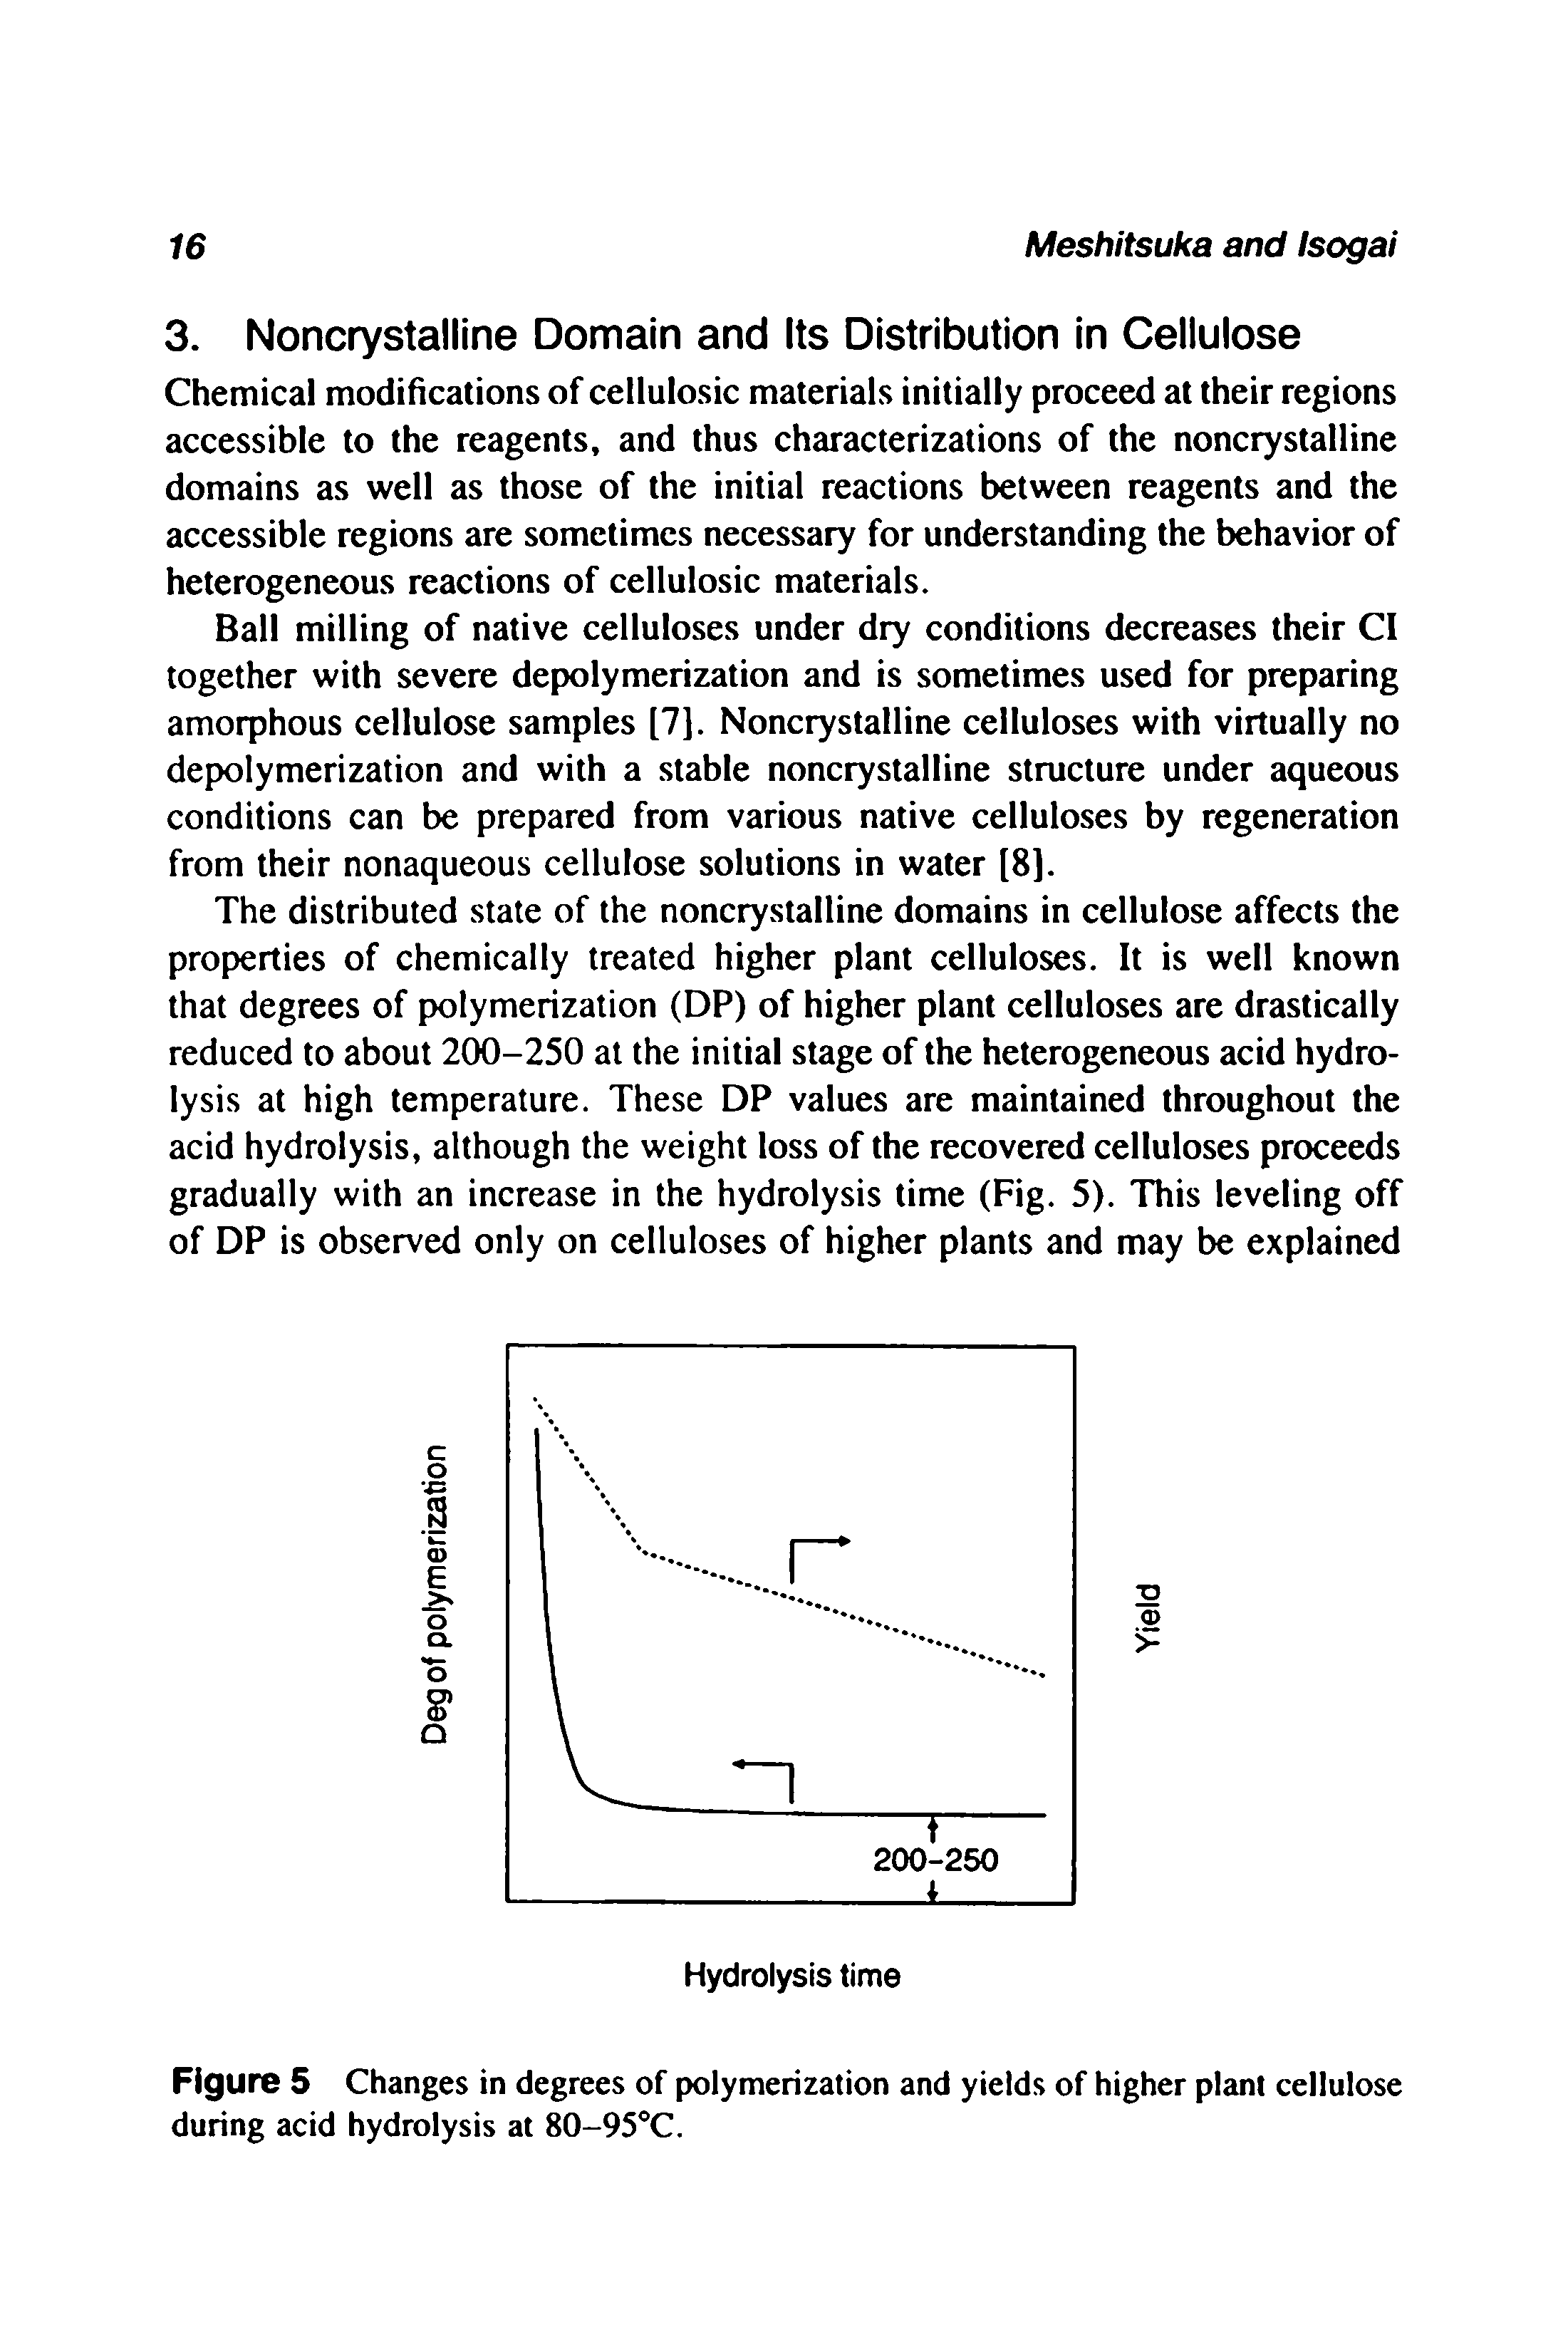 Figure 5 Changes in degrees of polymerization and yields of higher plant cellulose during acid hydrolysis at 80-95°C.